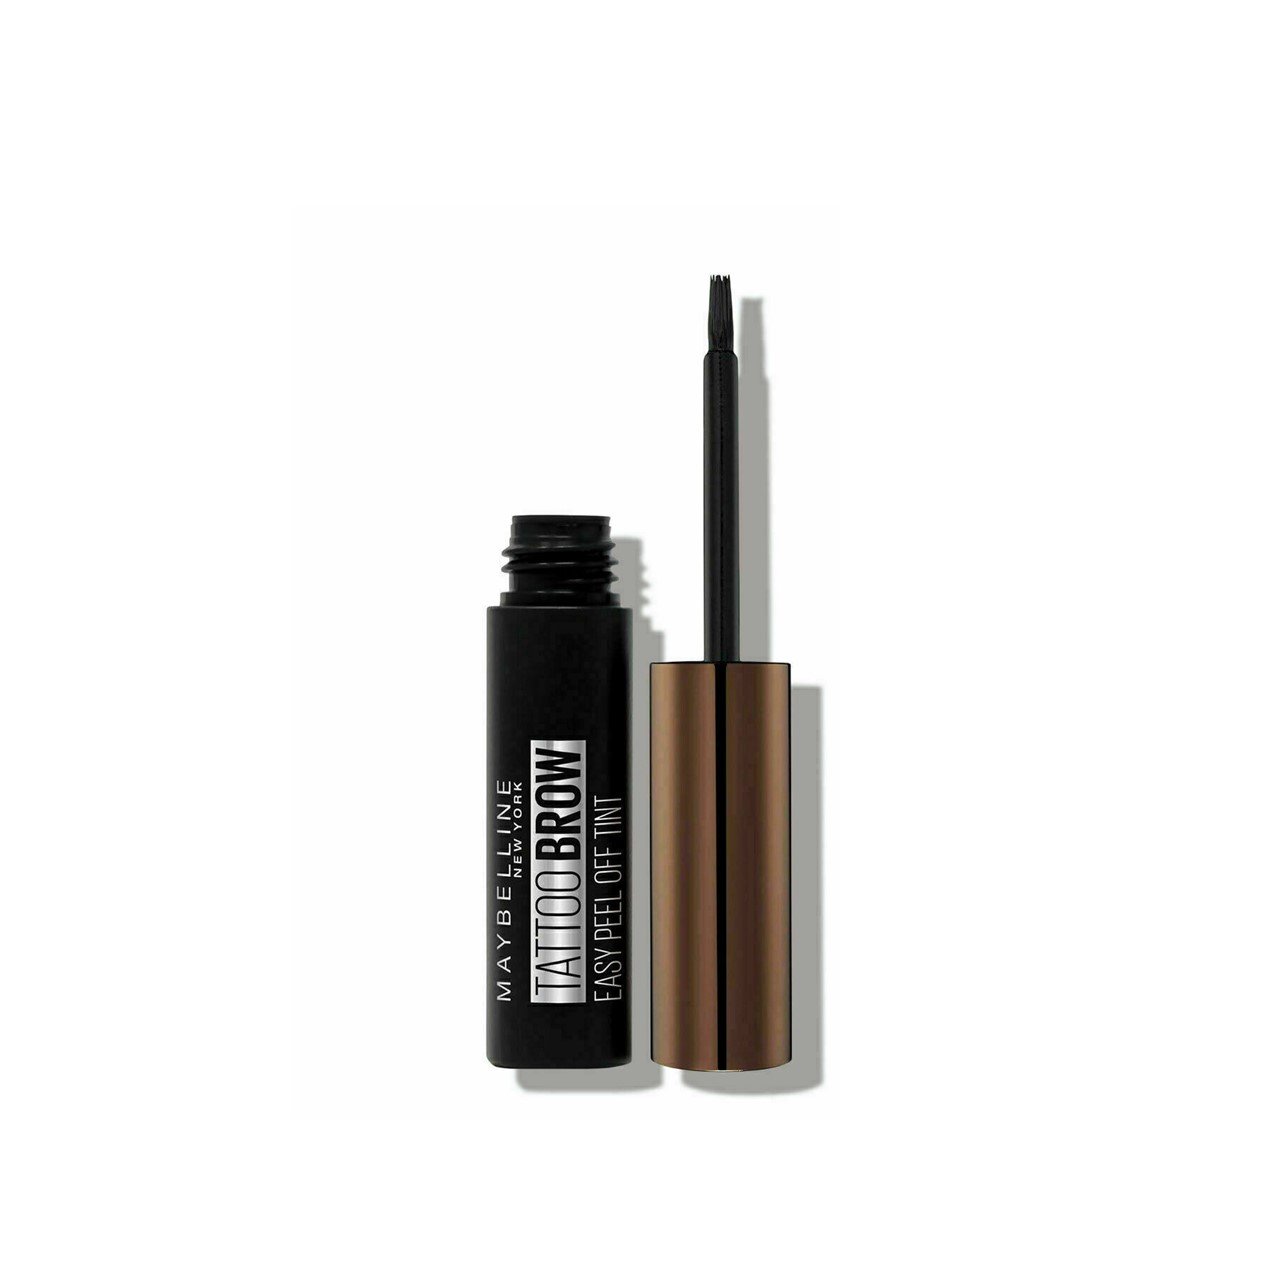 Maybelline TattooStudio Brow Pomade Review